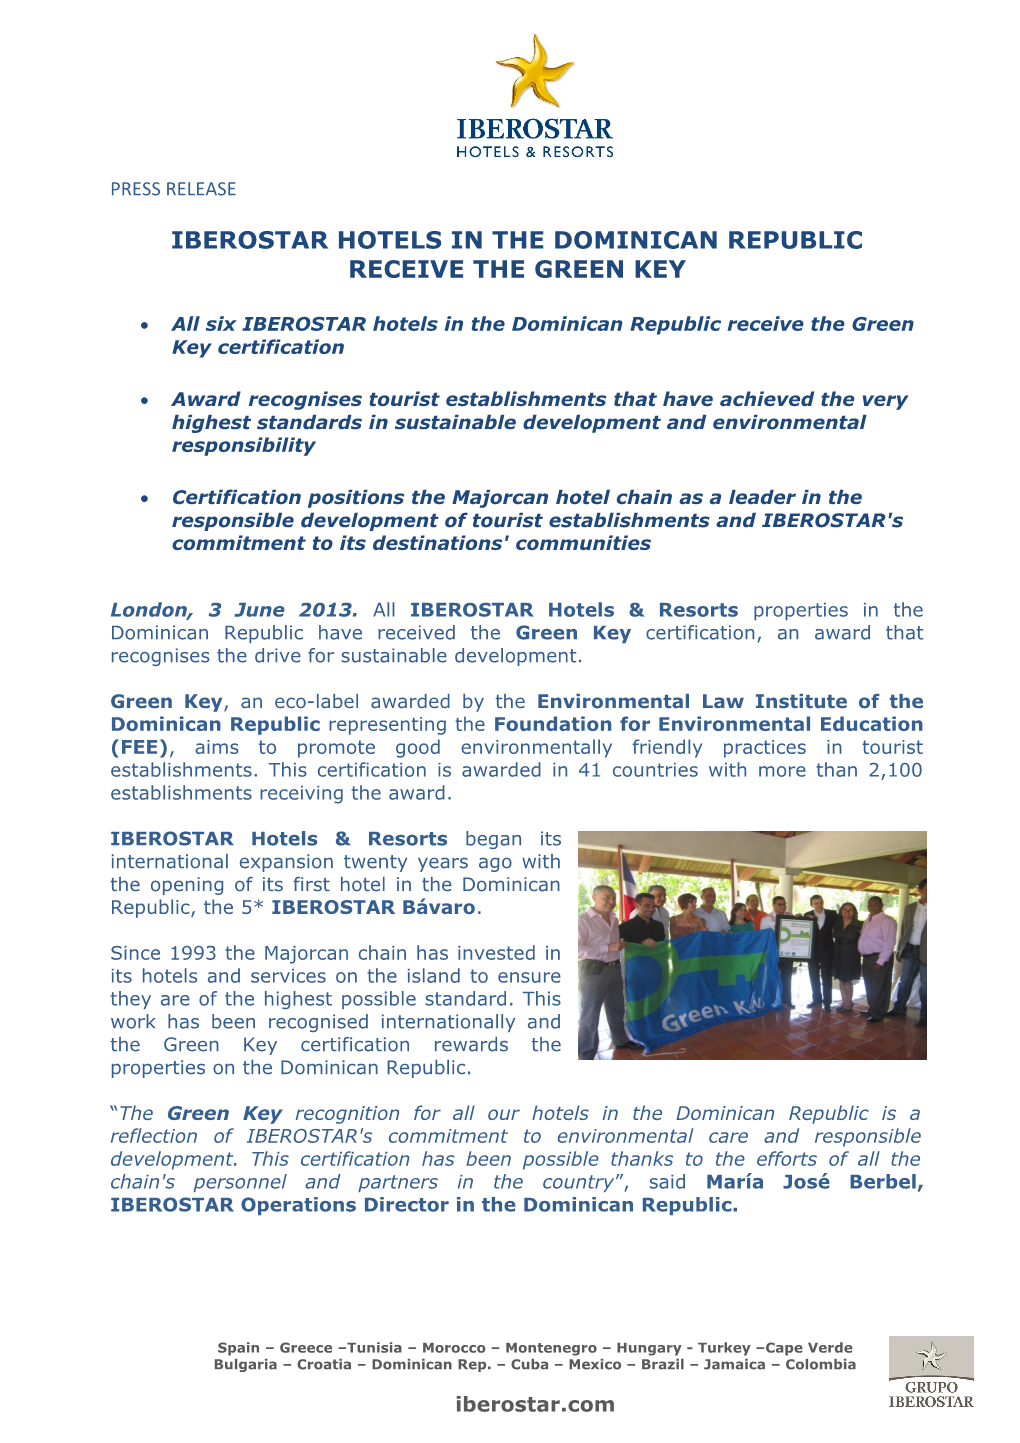 Iberostar Hotels in the Dominican Republic Receive the Green Key